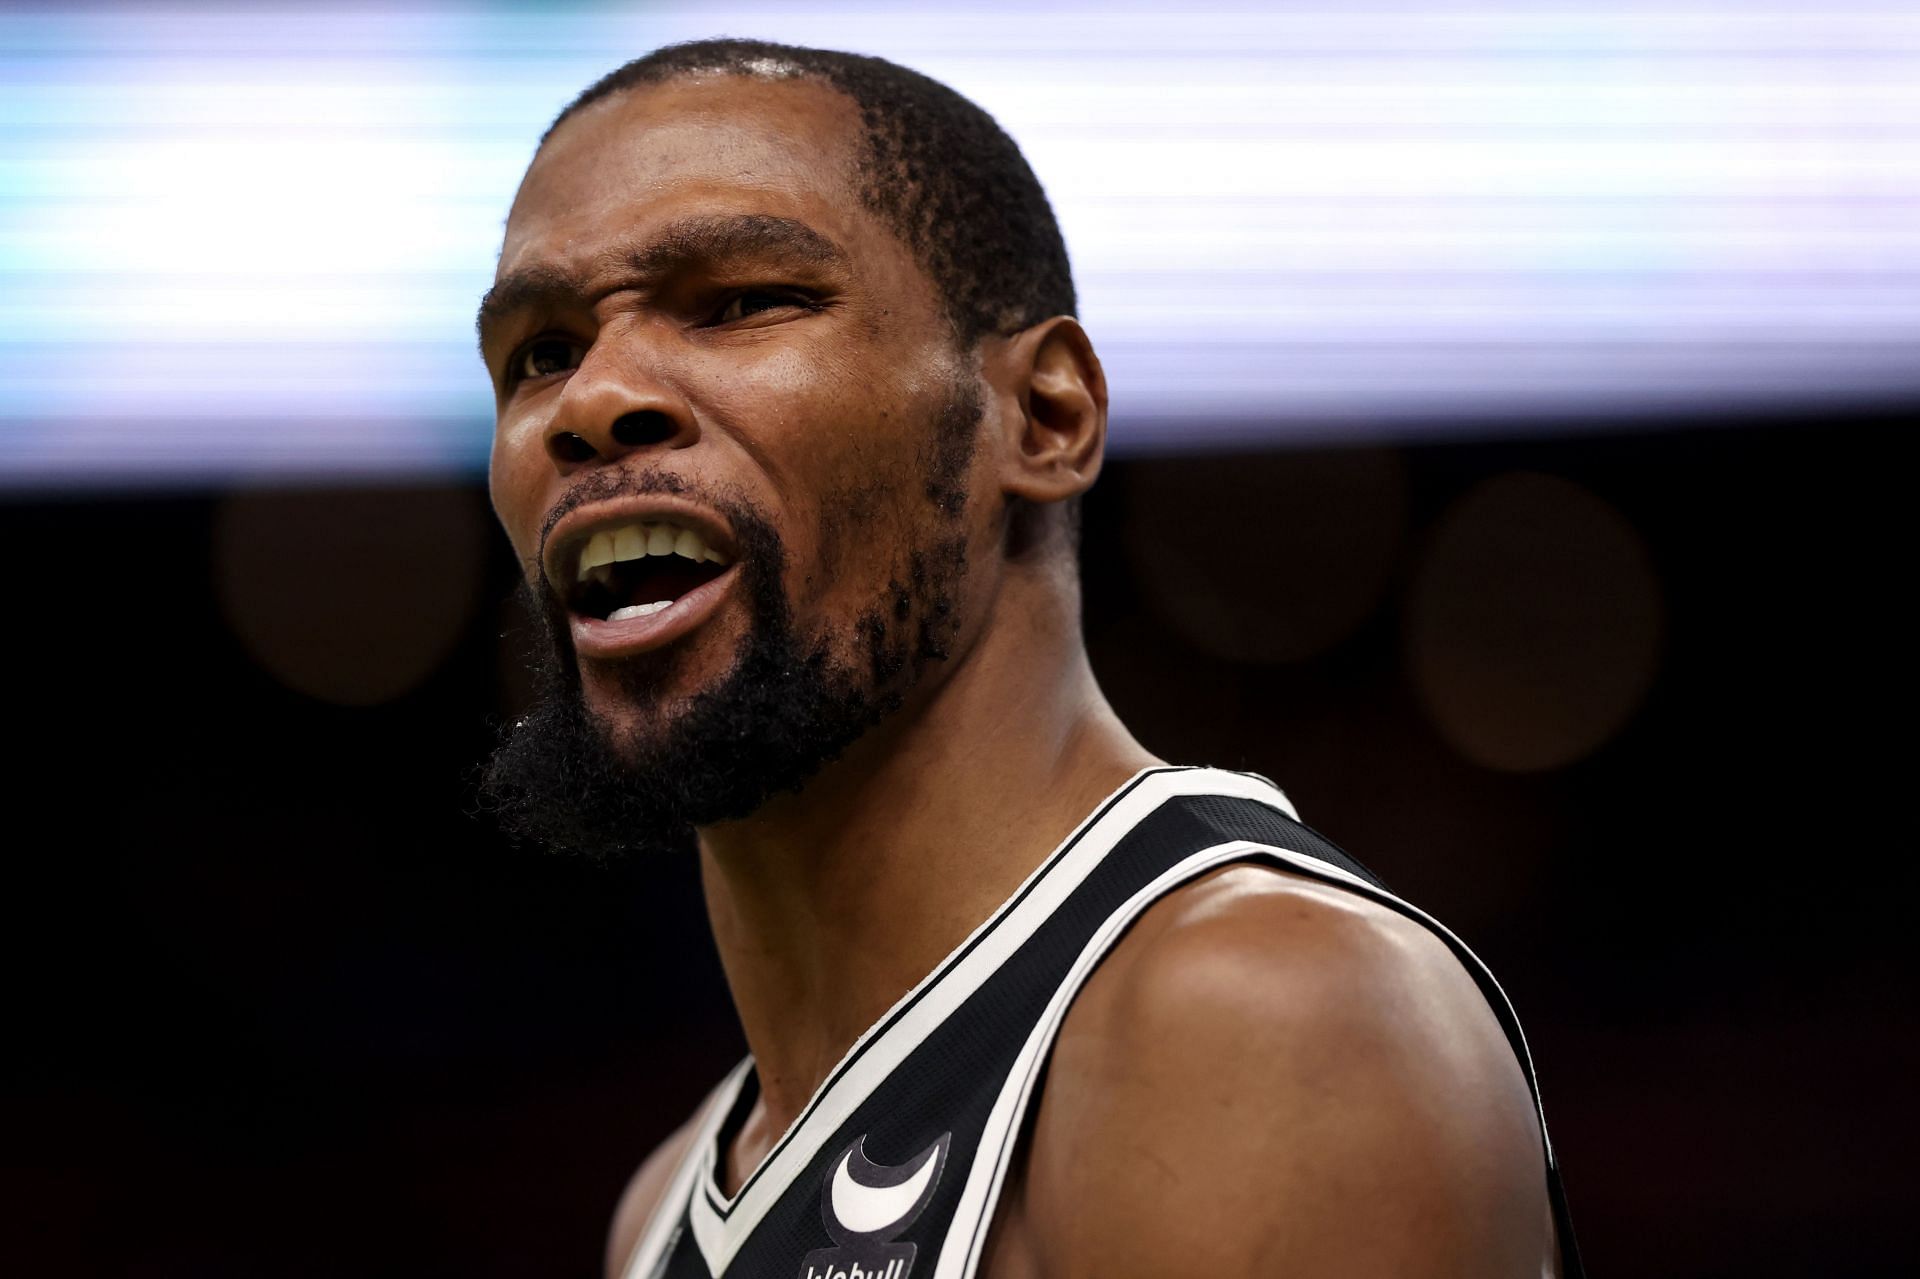 Kevin Durant #7 of the Brooklyn Nets disputes a call during the second quarter of Game Two of the Eastern Conference First Round NBA Playoffs against the Boston Celtics at TD Garden on April 20, 2022 in Boston, Massachusetts